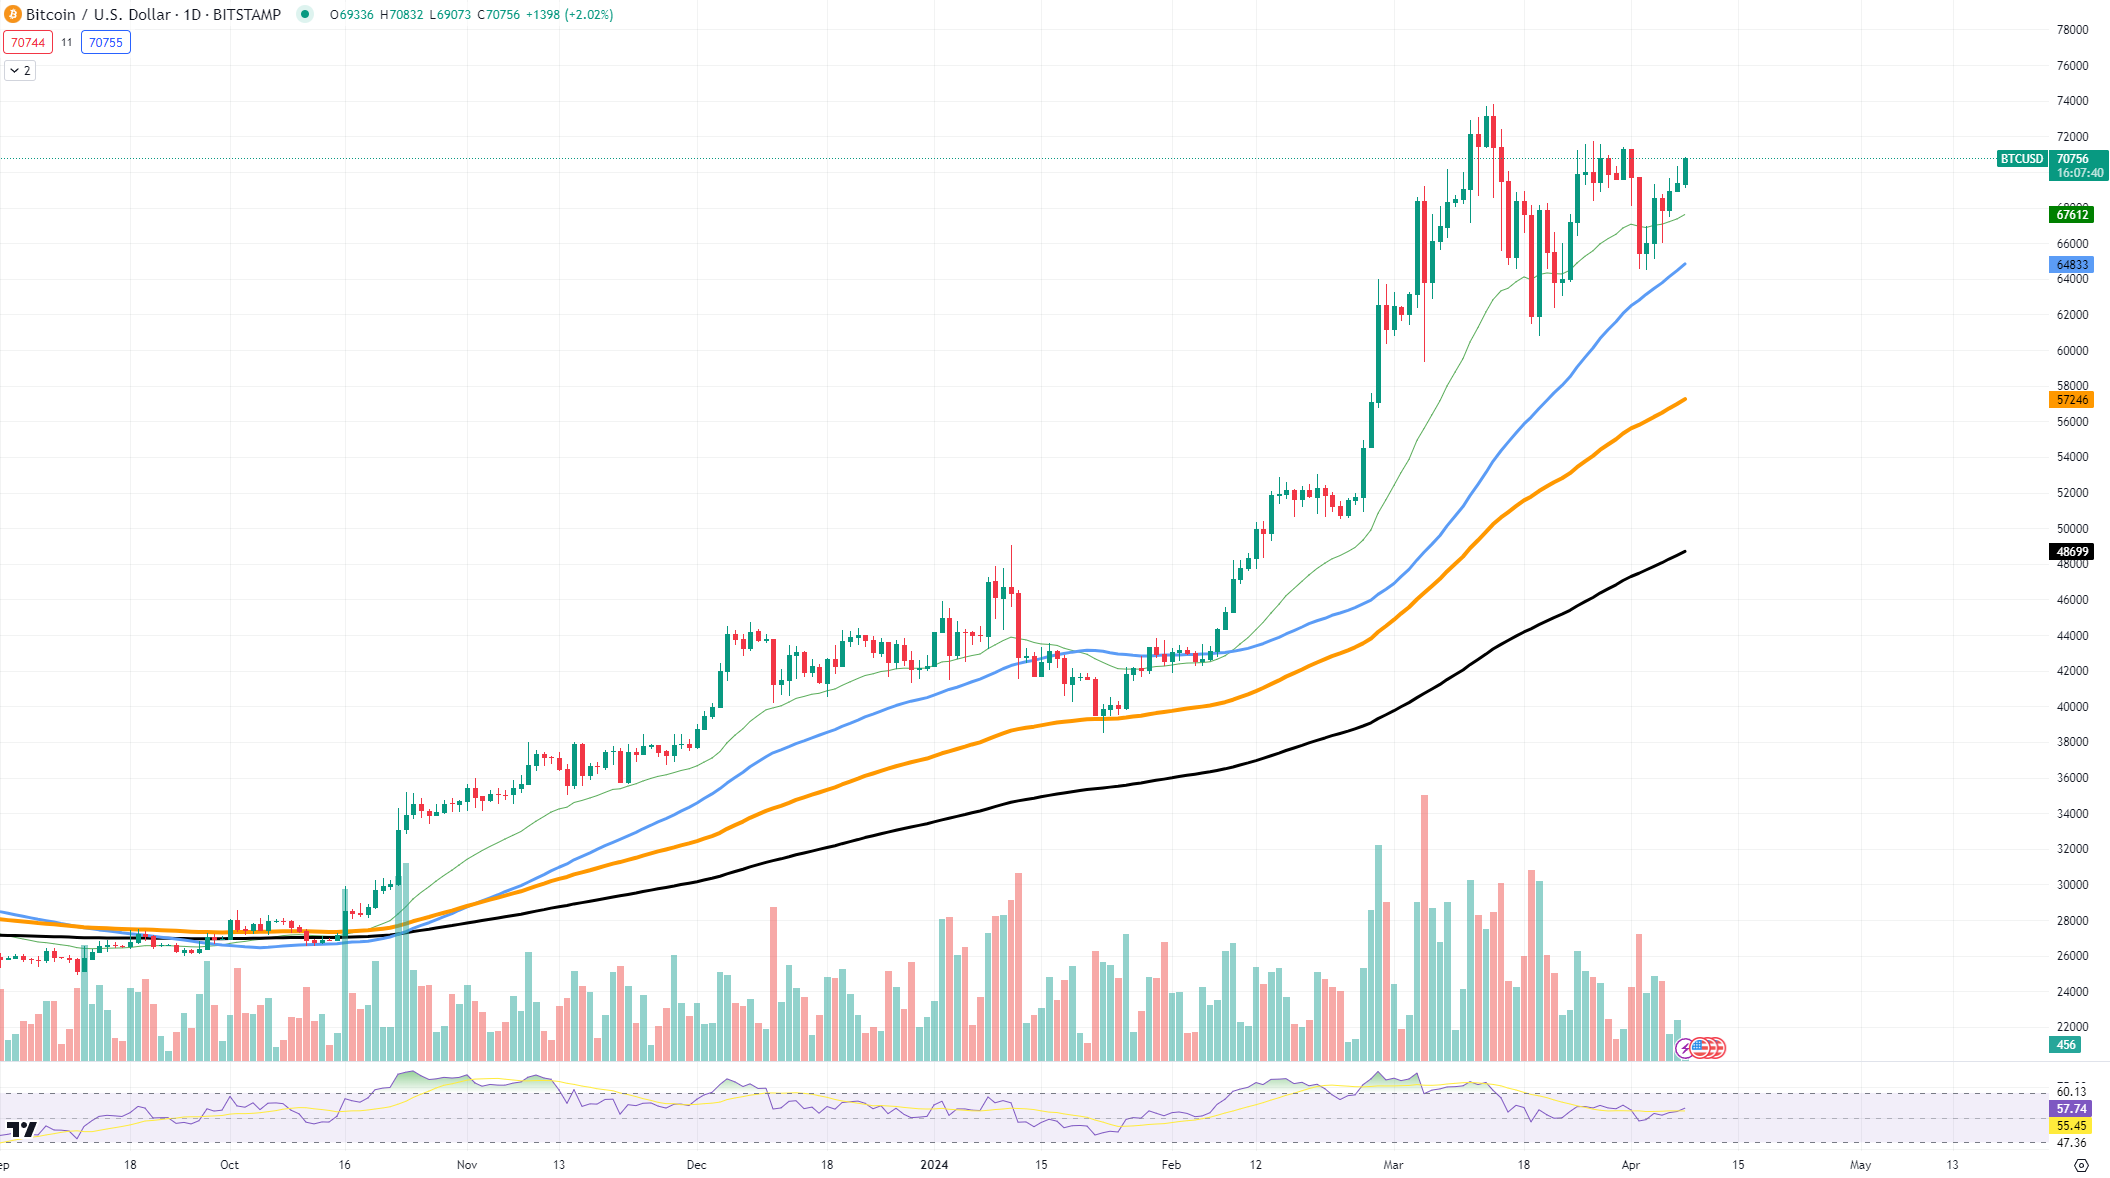 Bitcoin price is very active before the halving